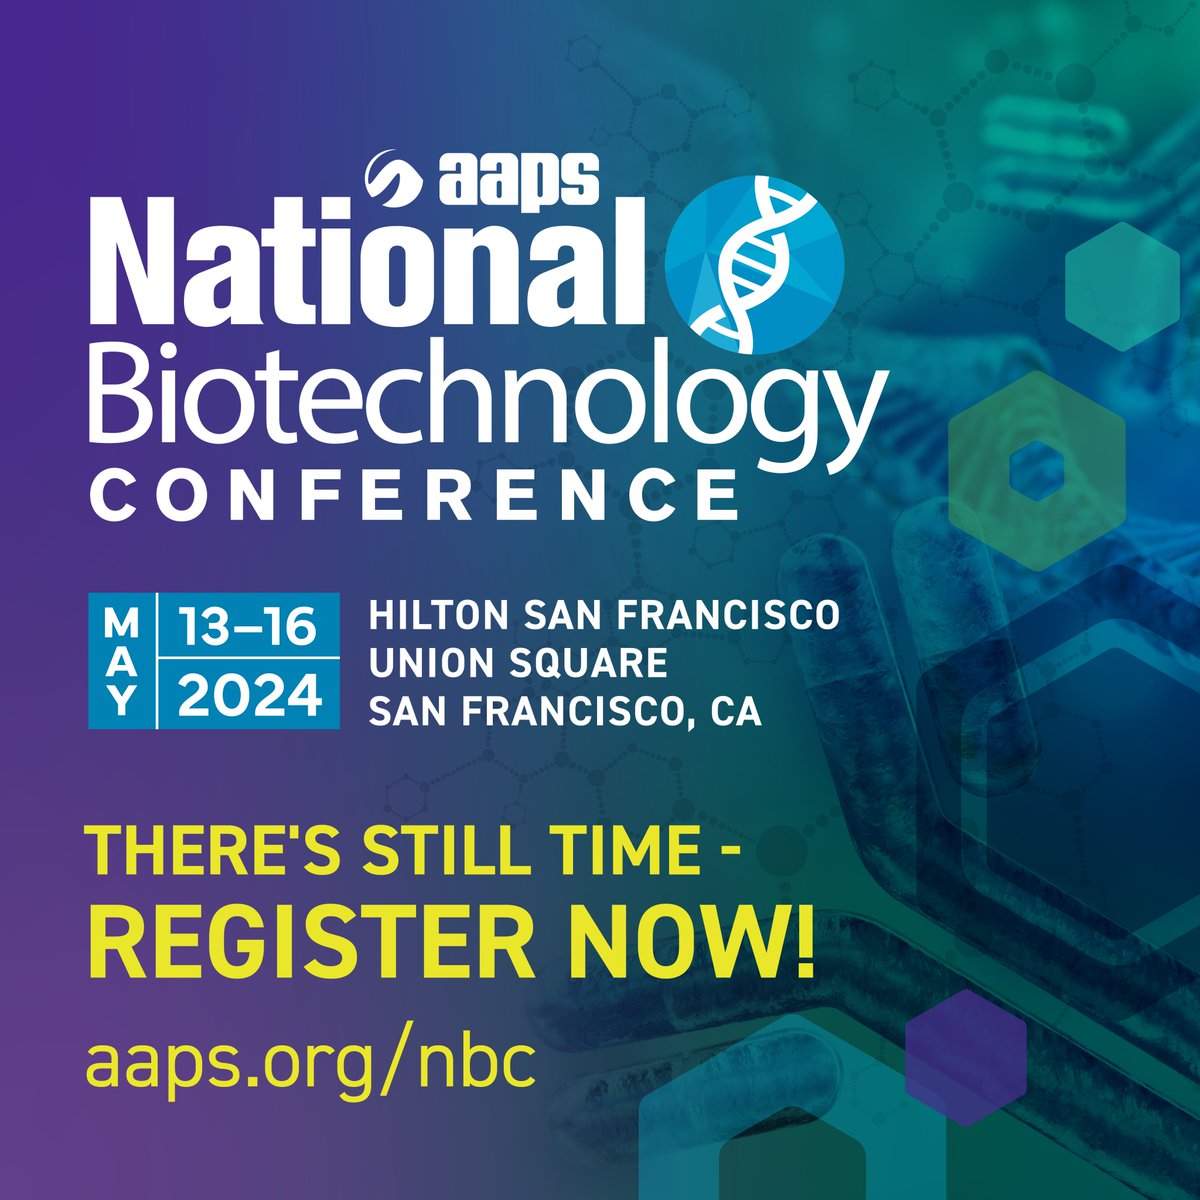 #Antibodies are a critical molecule class in #biologics with key roles in both the drug and the reagent spaces. See recent scientific developments in this area at the National Biotechnology Conference, #NBC2024, held May 13-16 in San Francisco: bit.ly/NBCReg41724